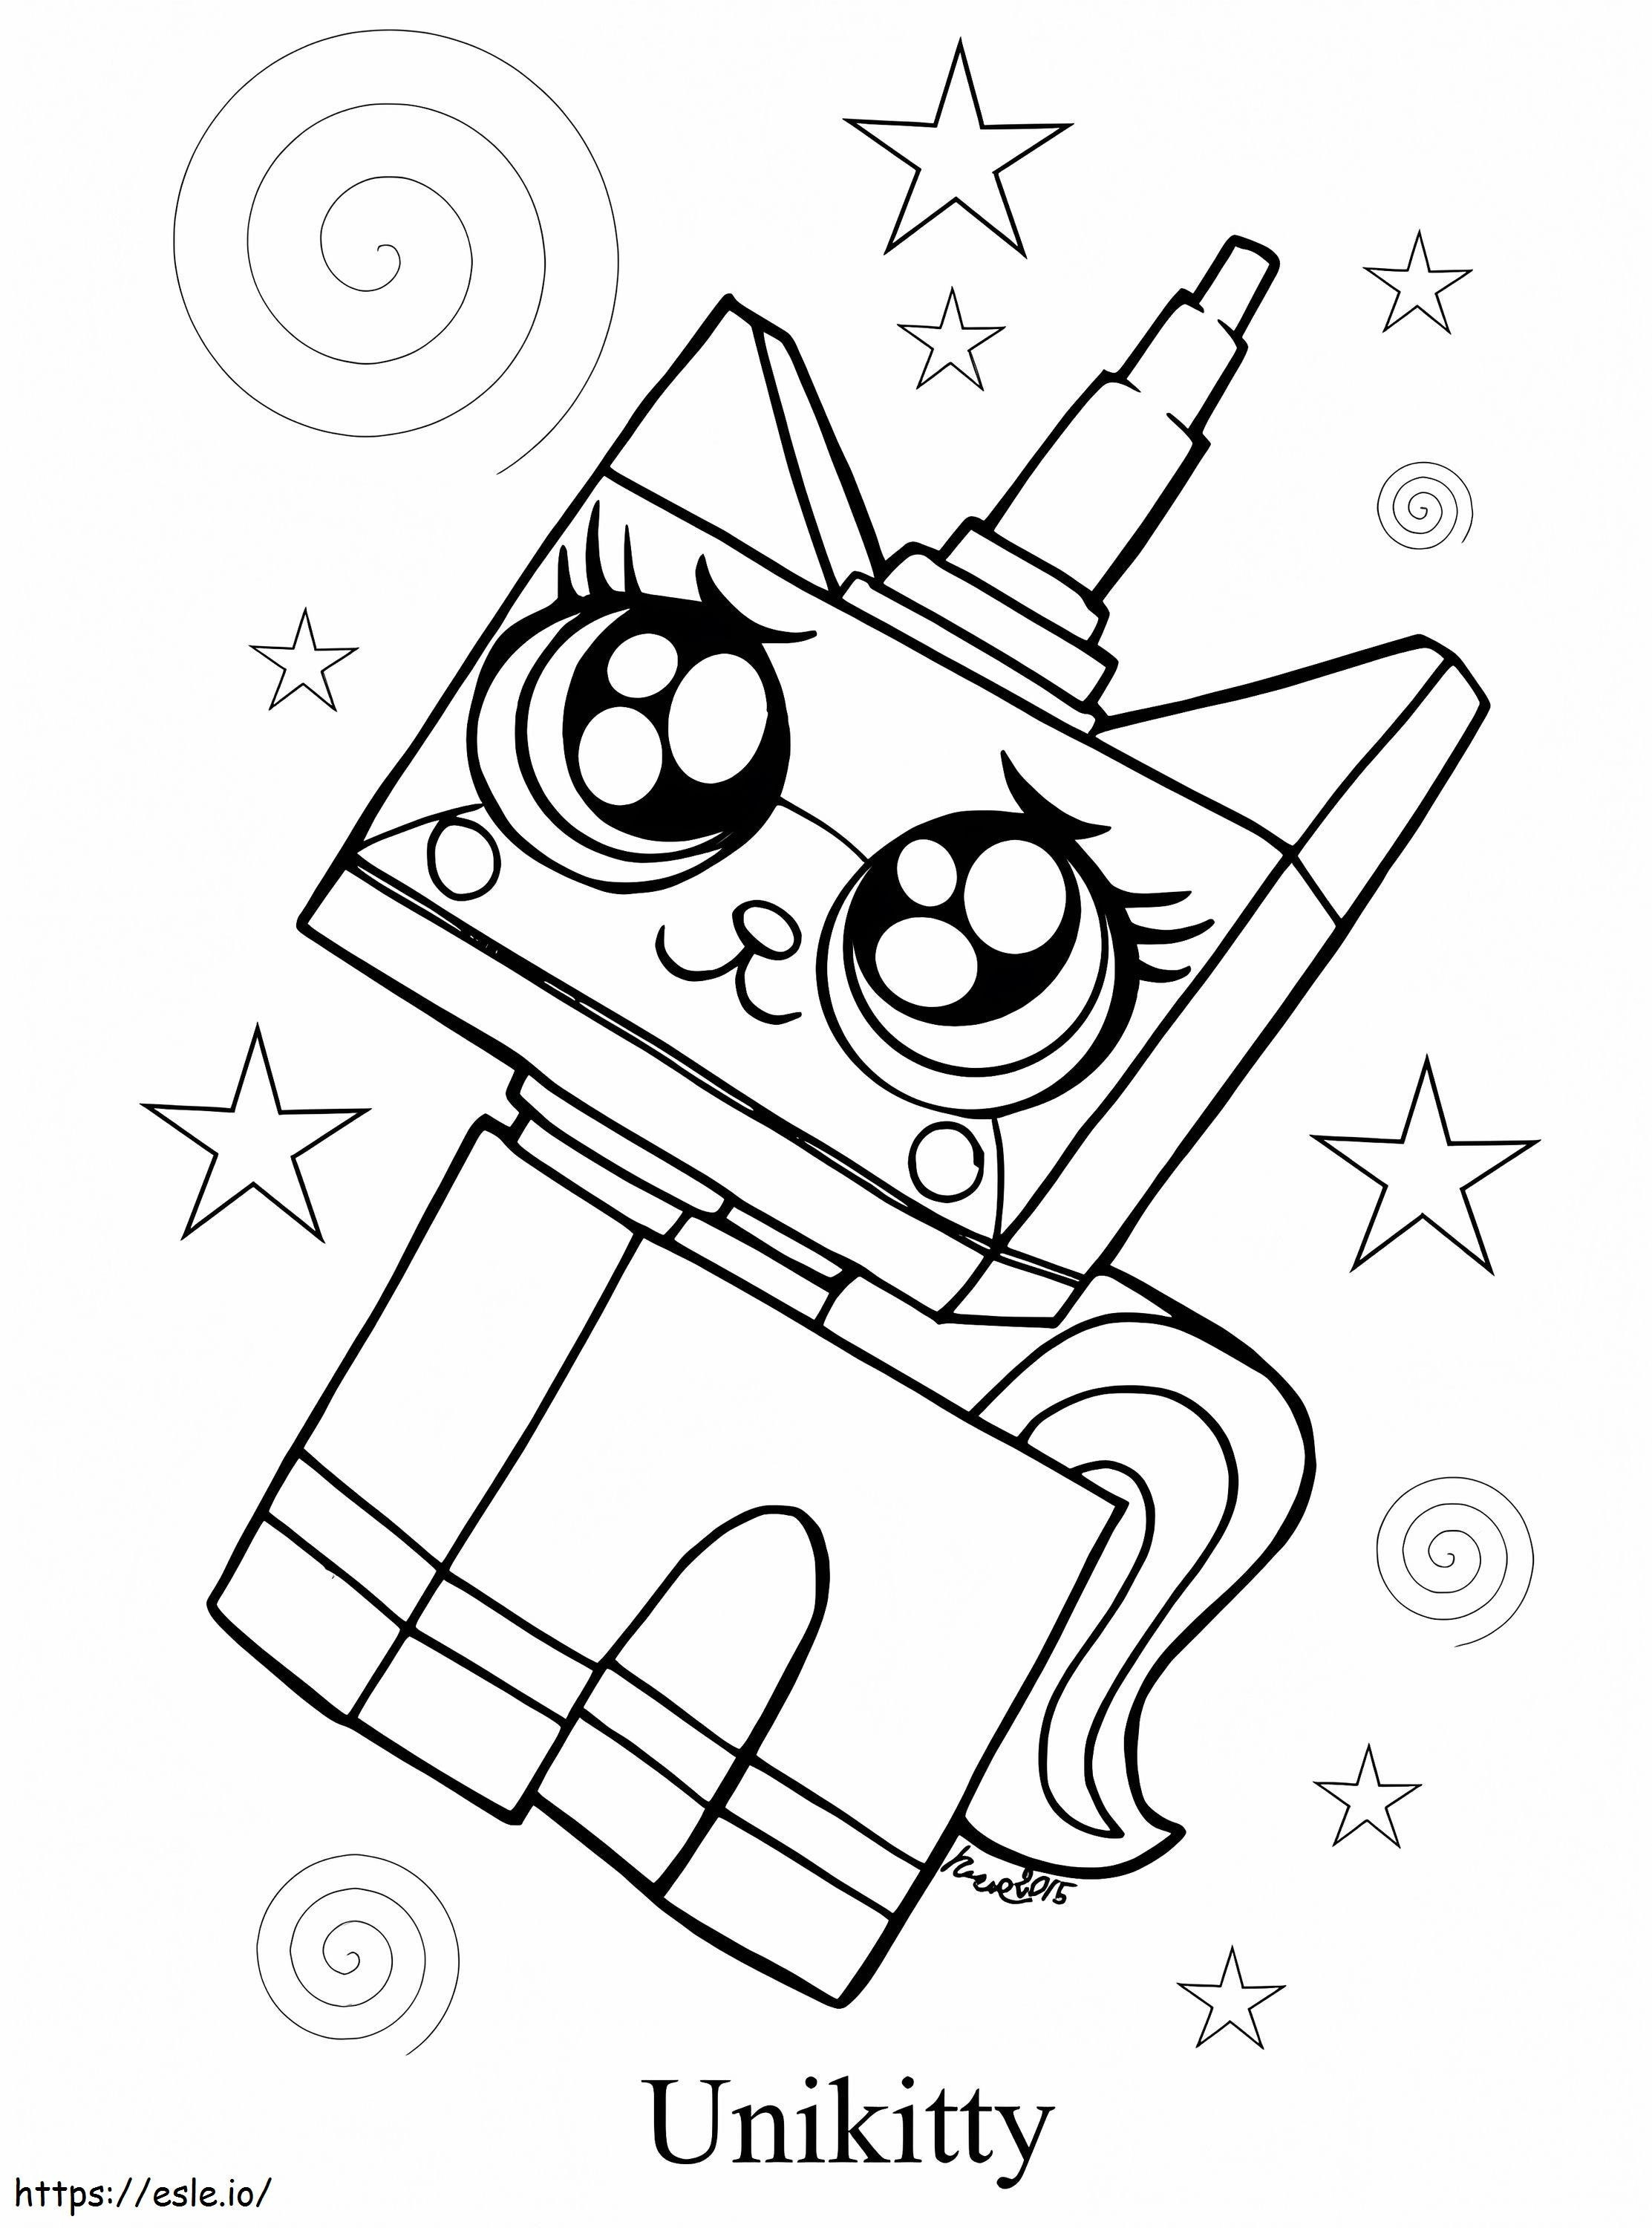 Unikitty 3 coloring page